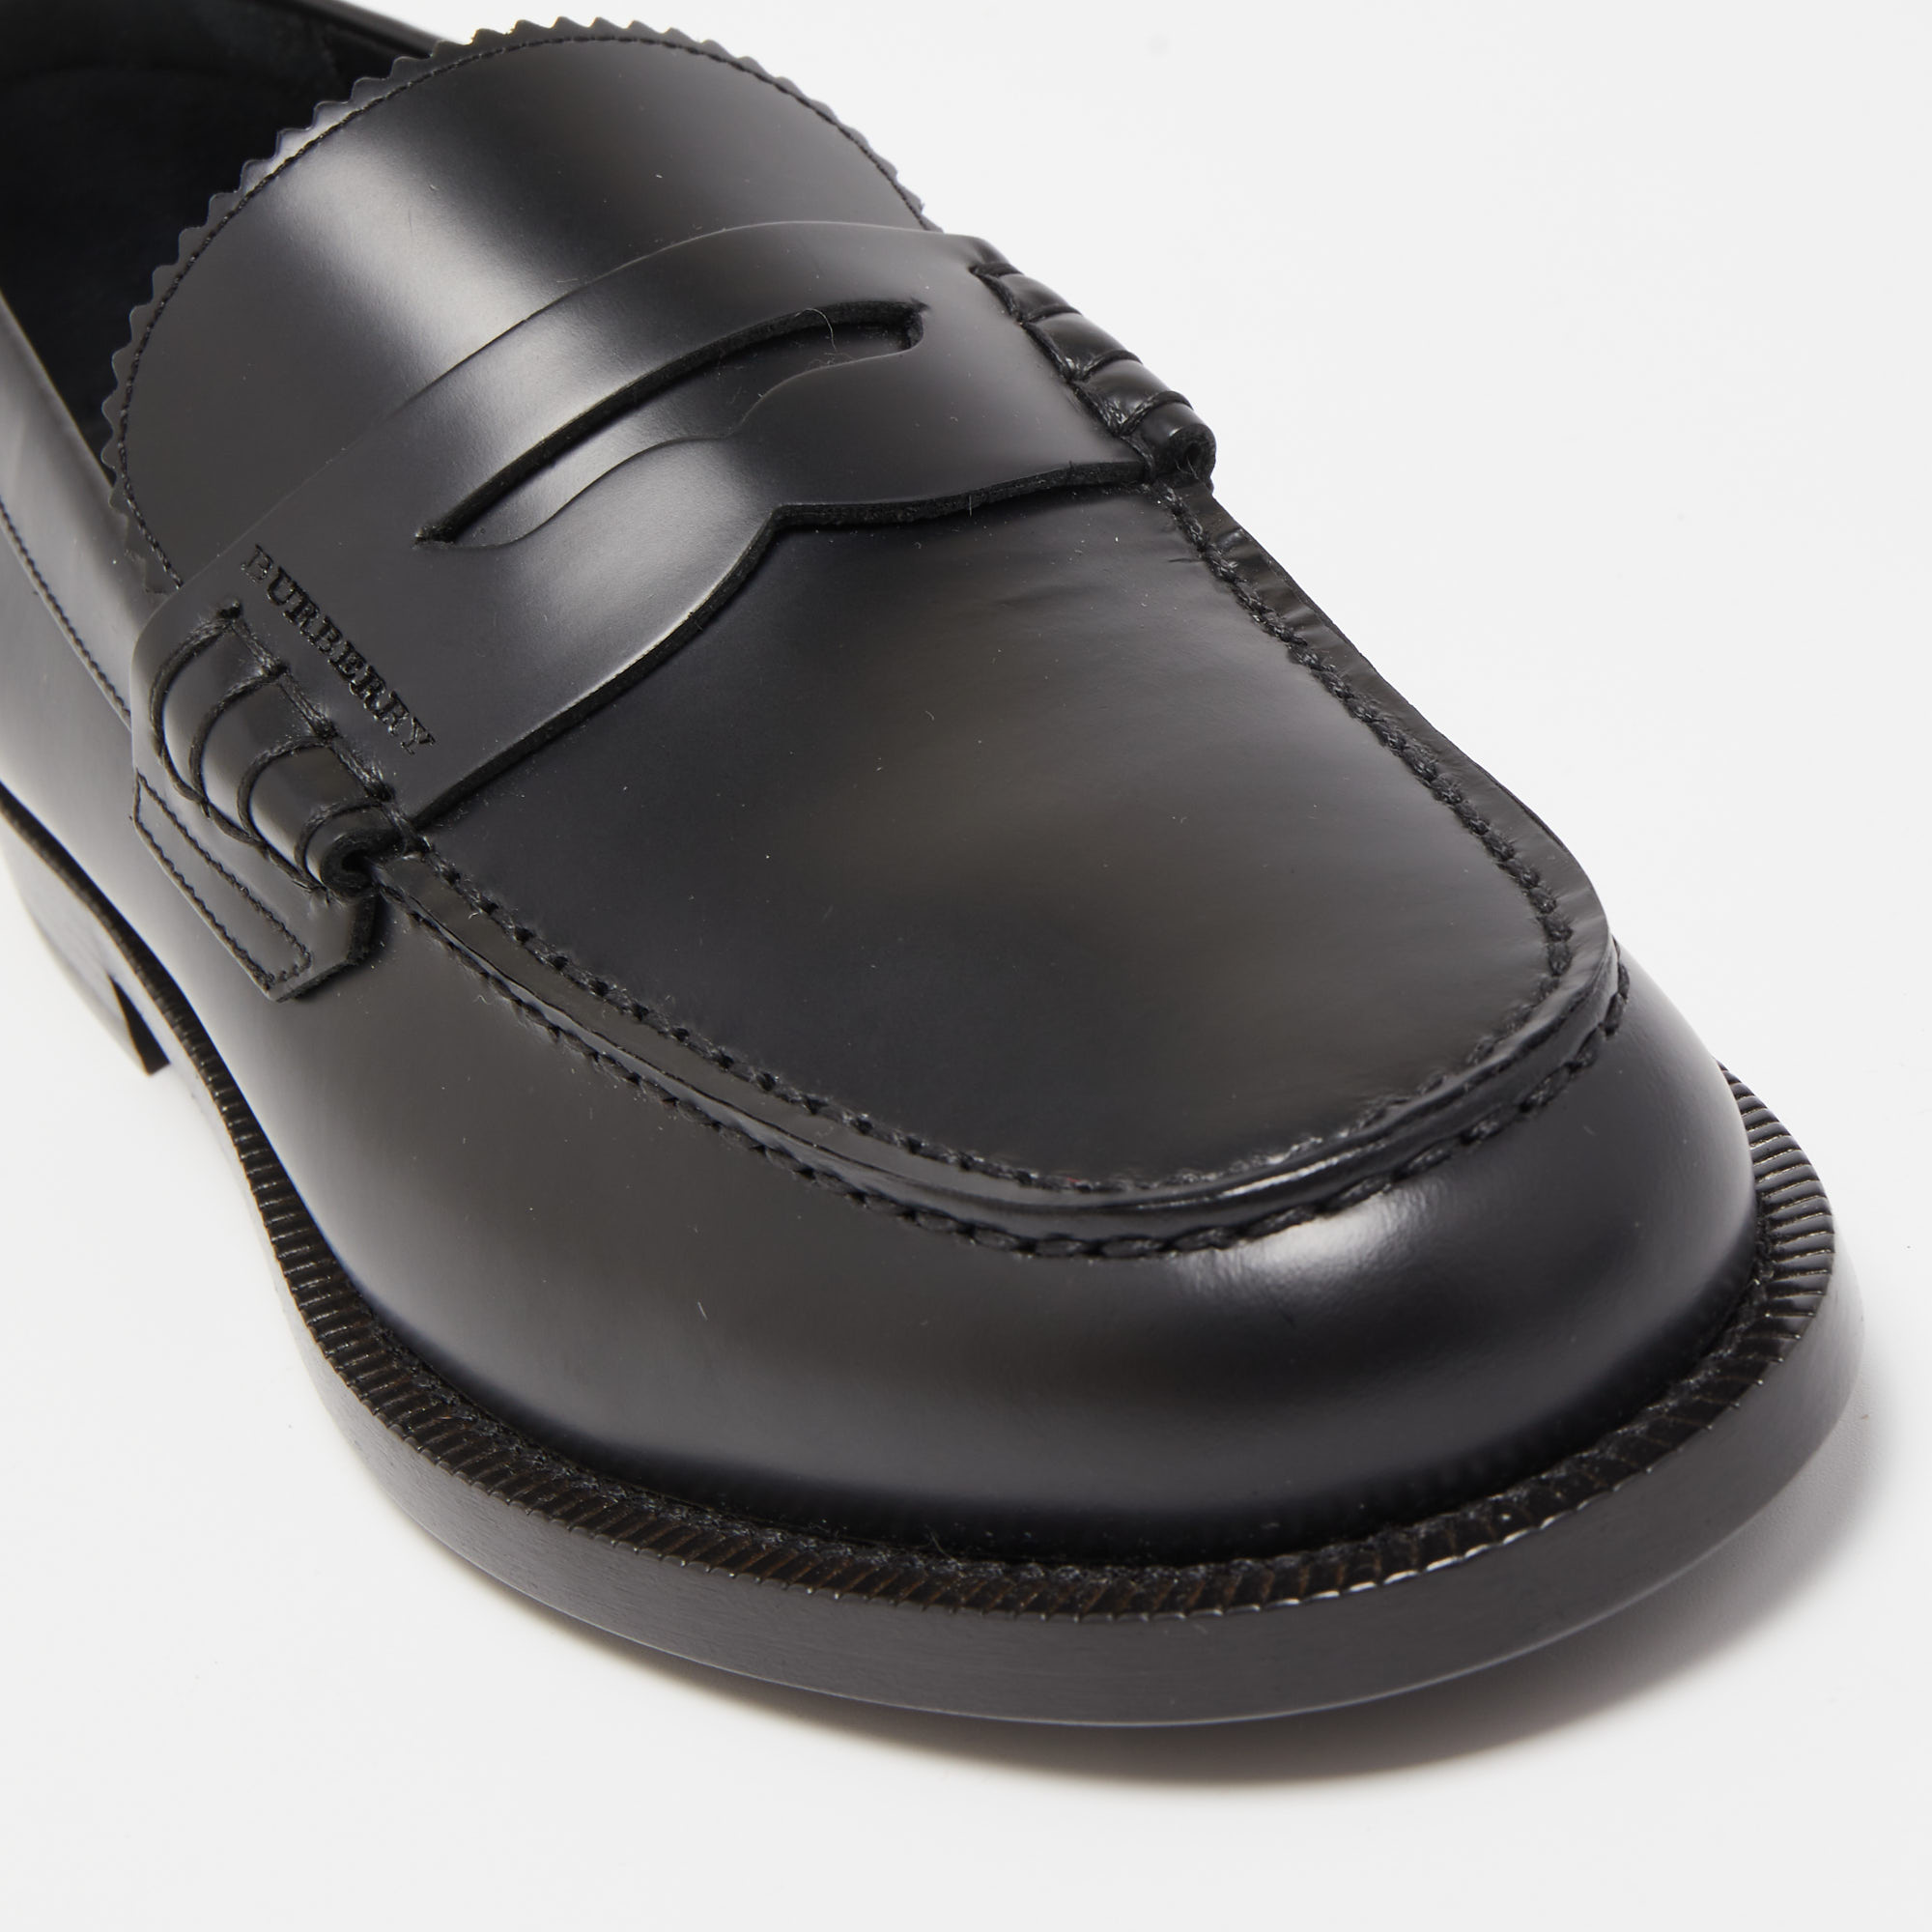 Burberry Black Leather Bedmont Penny Loafers Size 39.5